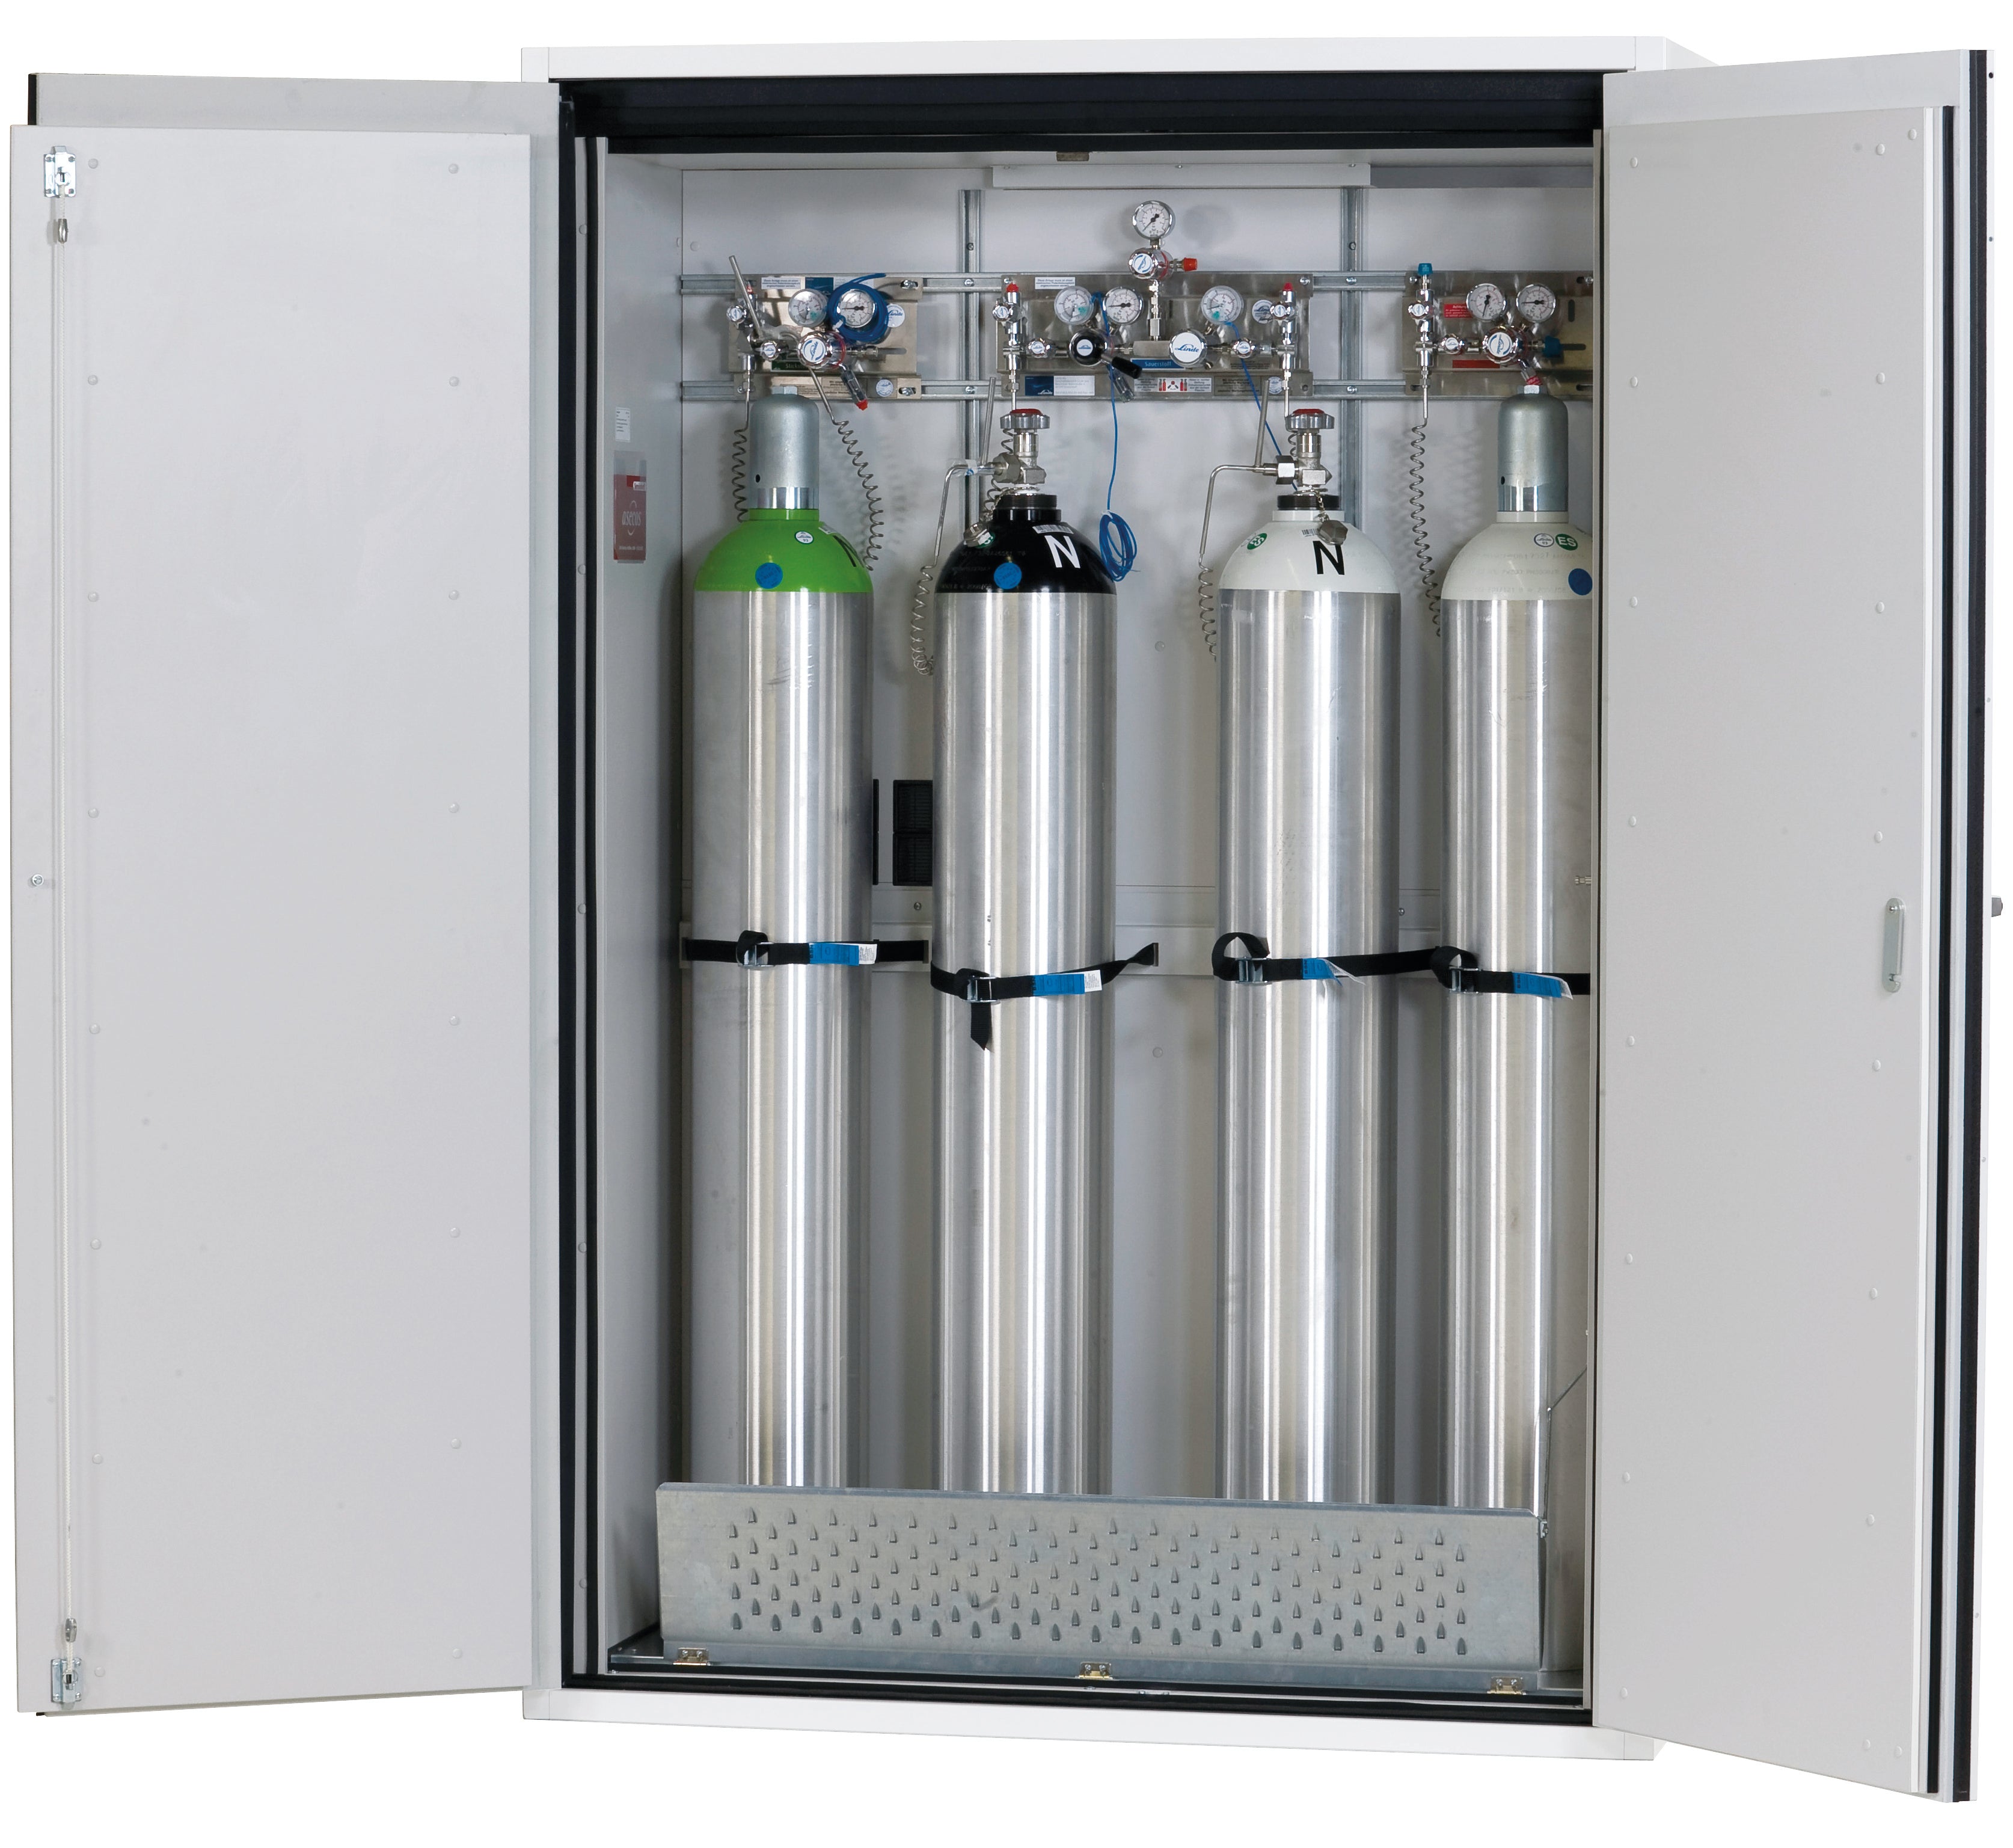 Type 90 compressed gas bottle cabinet G-ULTIMATE-90 model G90.205.140 in laboratory white (similar to RAL 9016) with comfortable interior fittings for 4x compressed gas bottles of 50 liters each